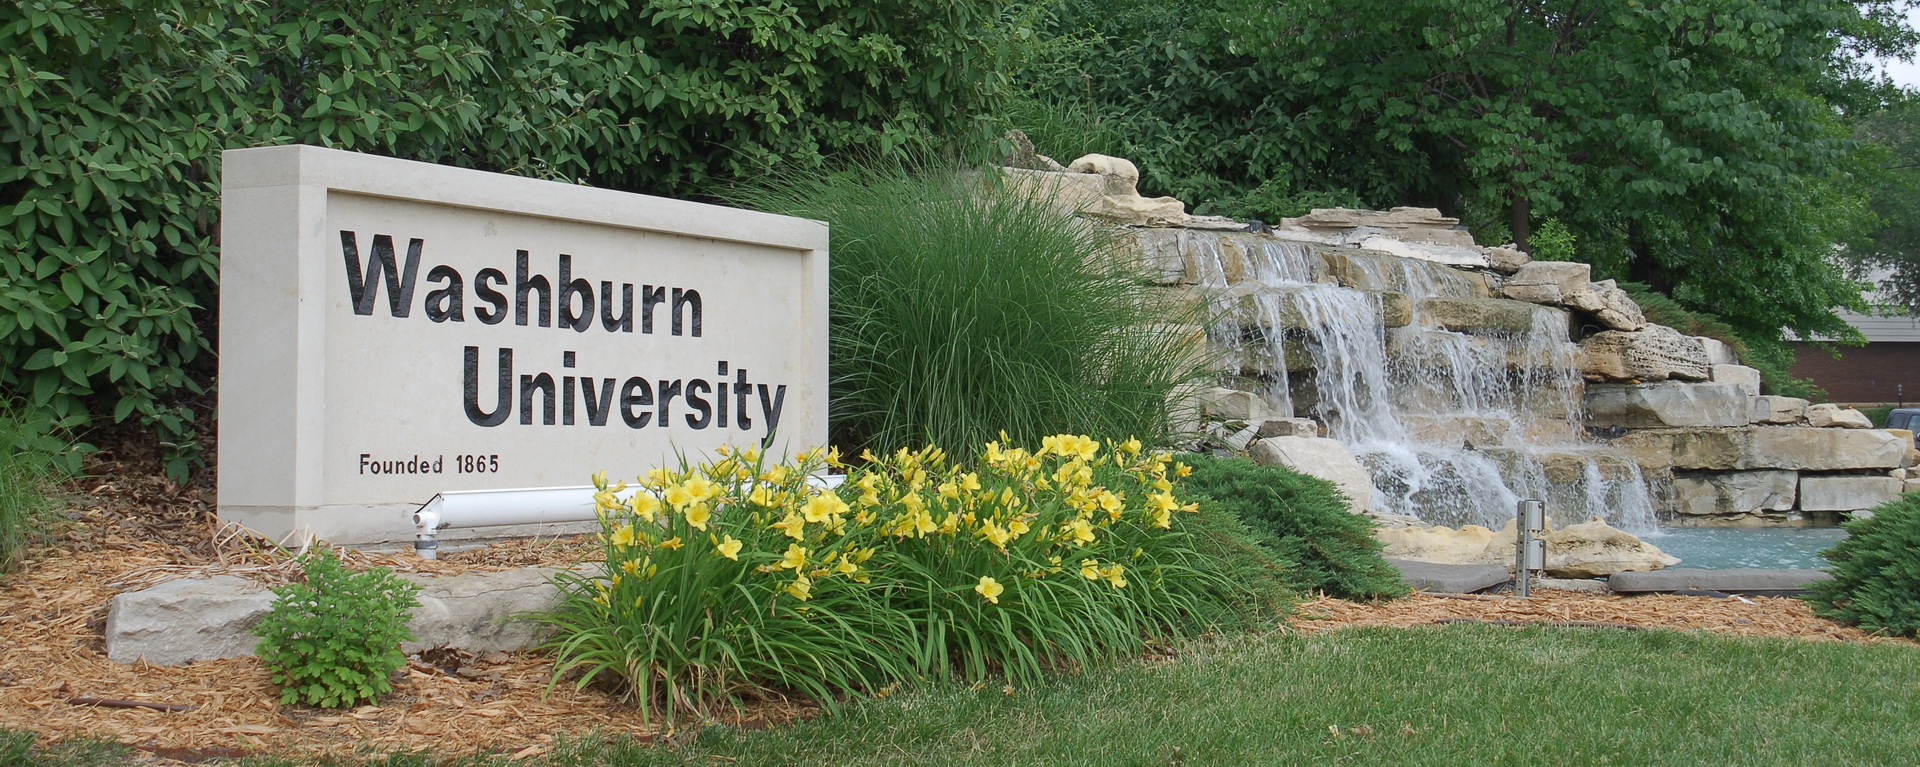 North east campus waterfall sign